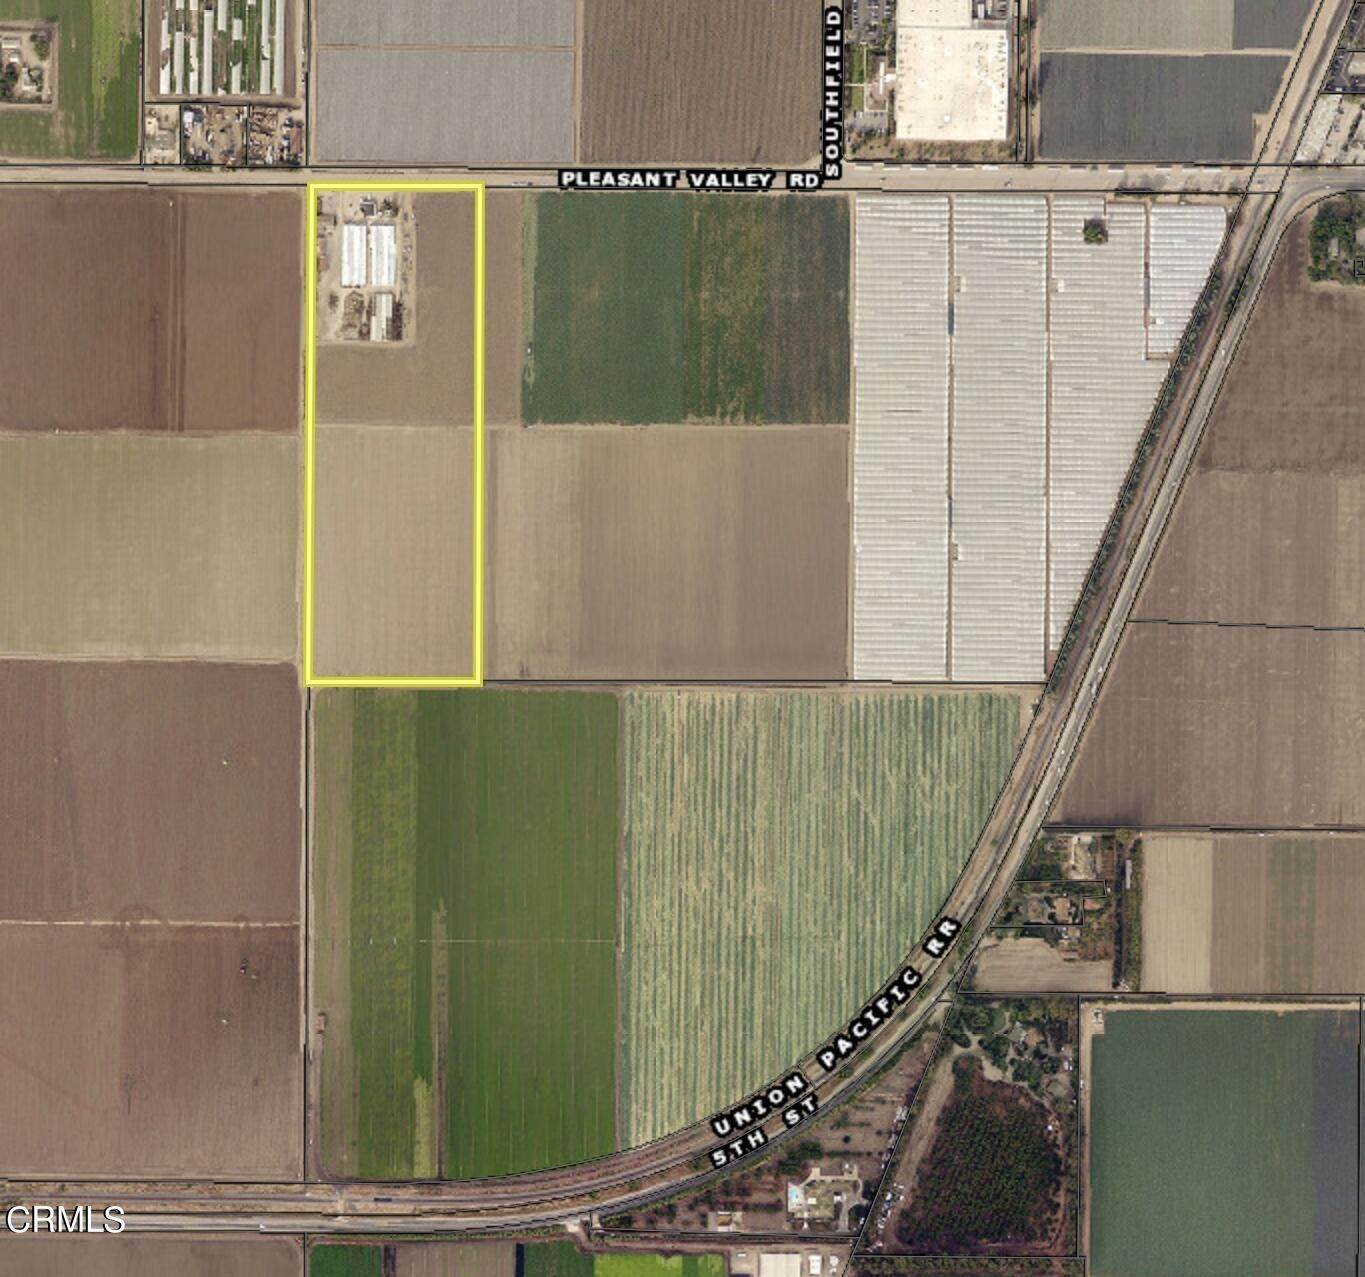 12. Land for Sale at 1675 Pleasant Valley Road Camarillo, California 93010 United States